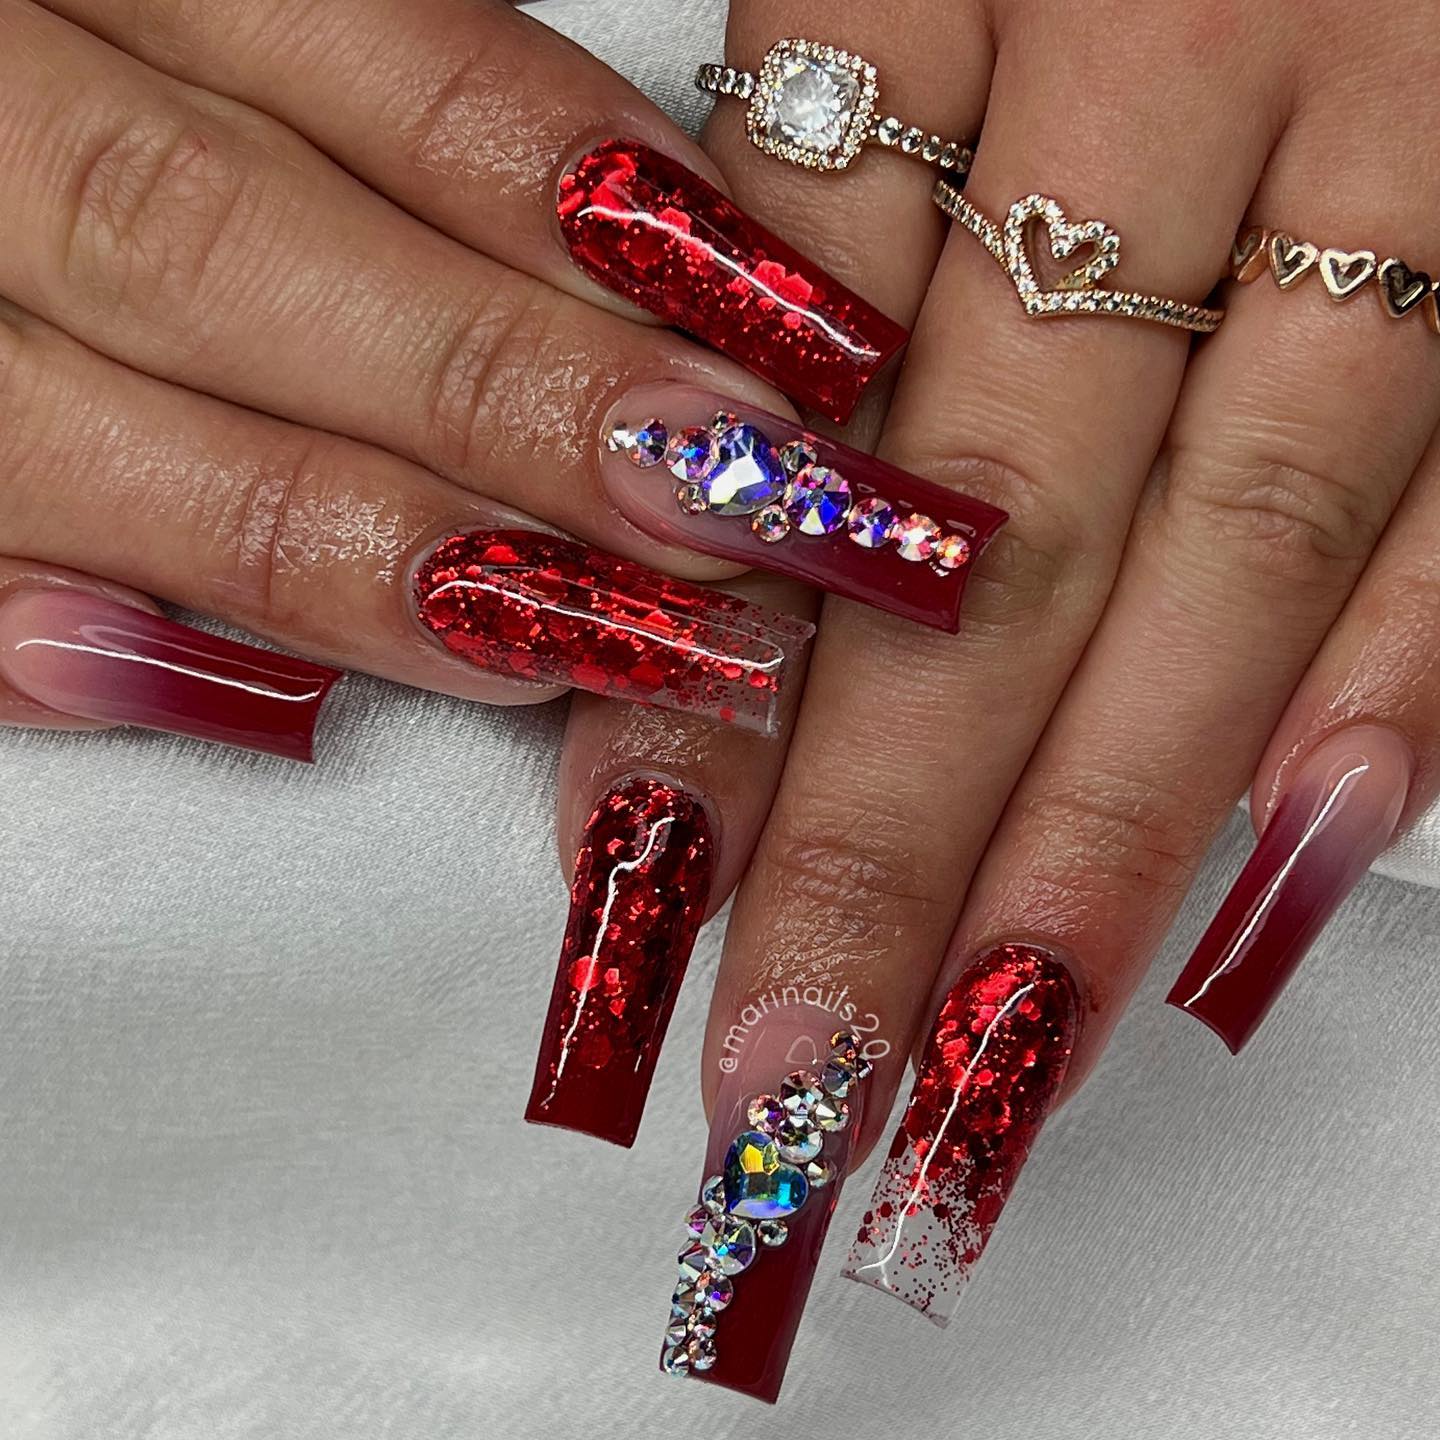 Orange - red ombré nail designs with 3 D flowers 🌸  𝒫𝓇𝑜𝒻𝑒𝓈𝓈𝒾𝑜𝓃𝒶𝓁 𝒩𝒶𝒾𝓁 𝒞𝒶𝓇𝑒... | Instagram